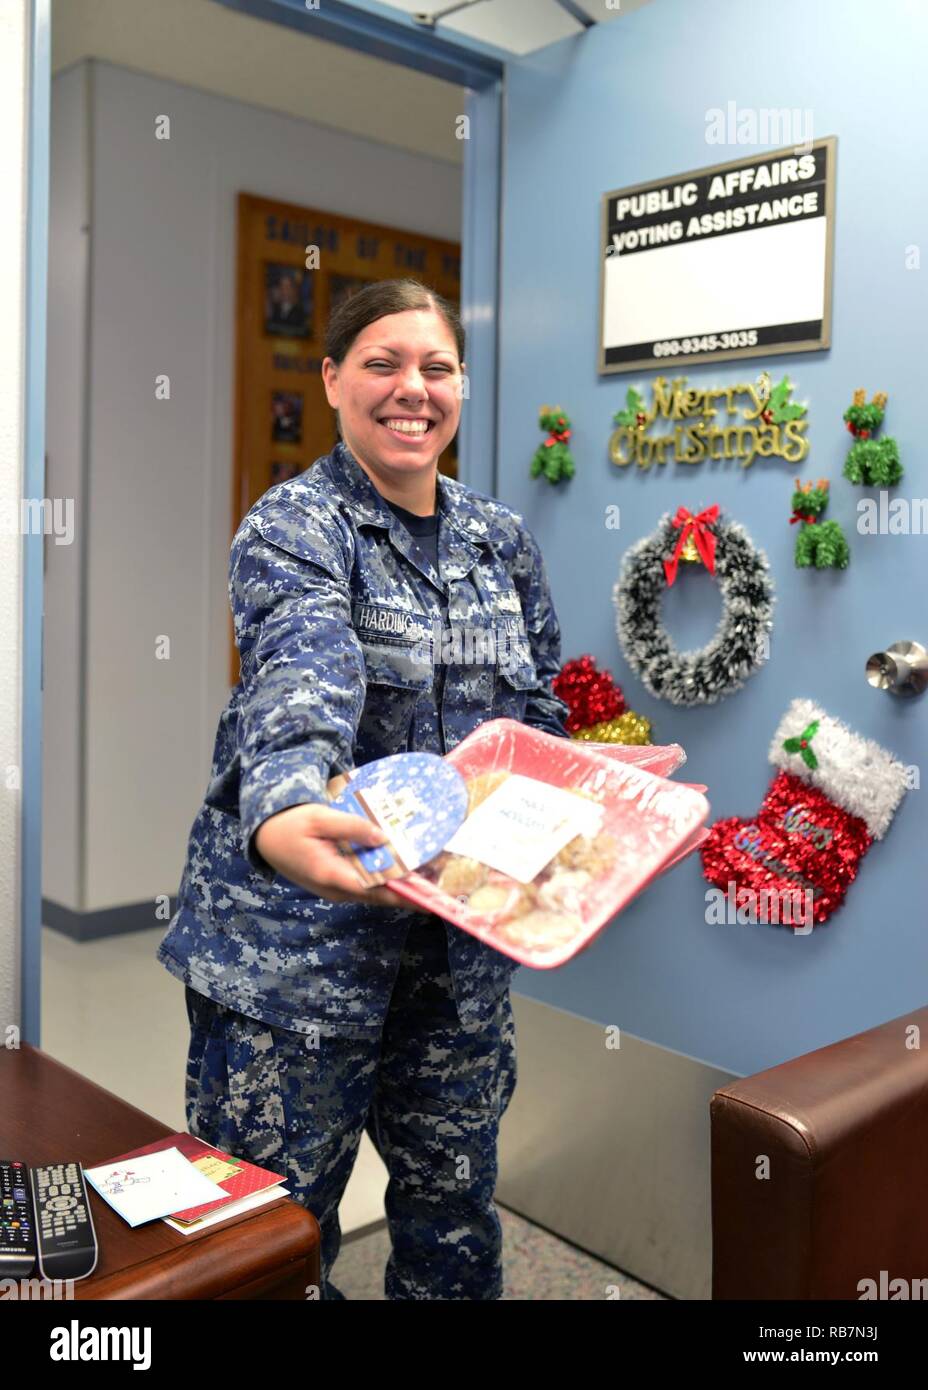 MISAWA, Japan (Dec. 7, 2016) Petty Officer 2nd Class Raven Harding hands out packages of cookies for the 2016 Cookie Caper at Misawa Airbase. Hundreds of volunteers made over 36,000 cookies and packaged them into 3,000 gifts to give to single unaccompanied Servicemembers stationed at Misawa Airbase for the holidays. Stock Photo